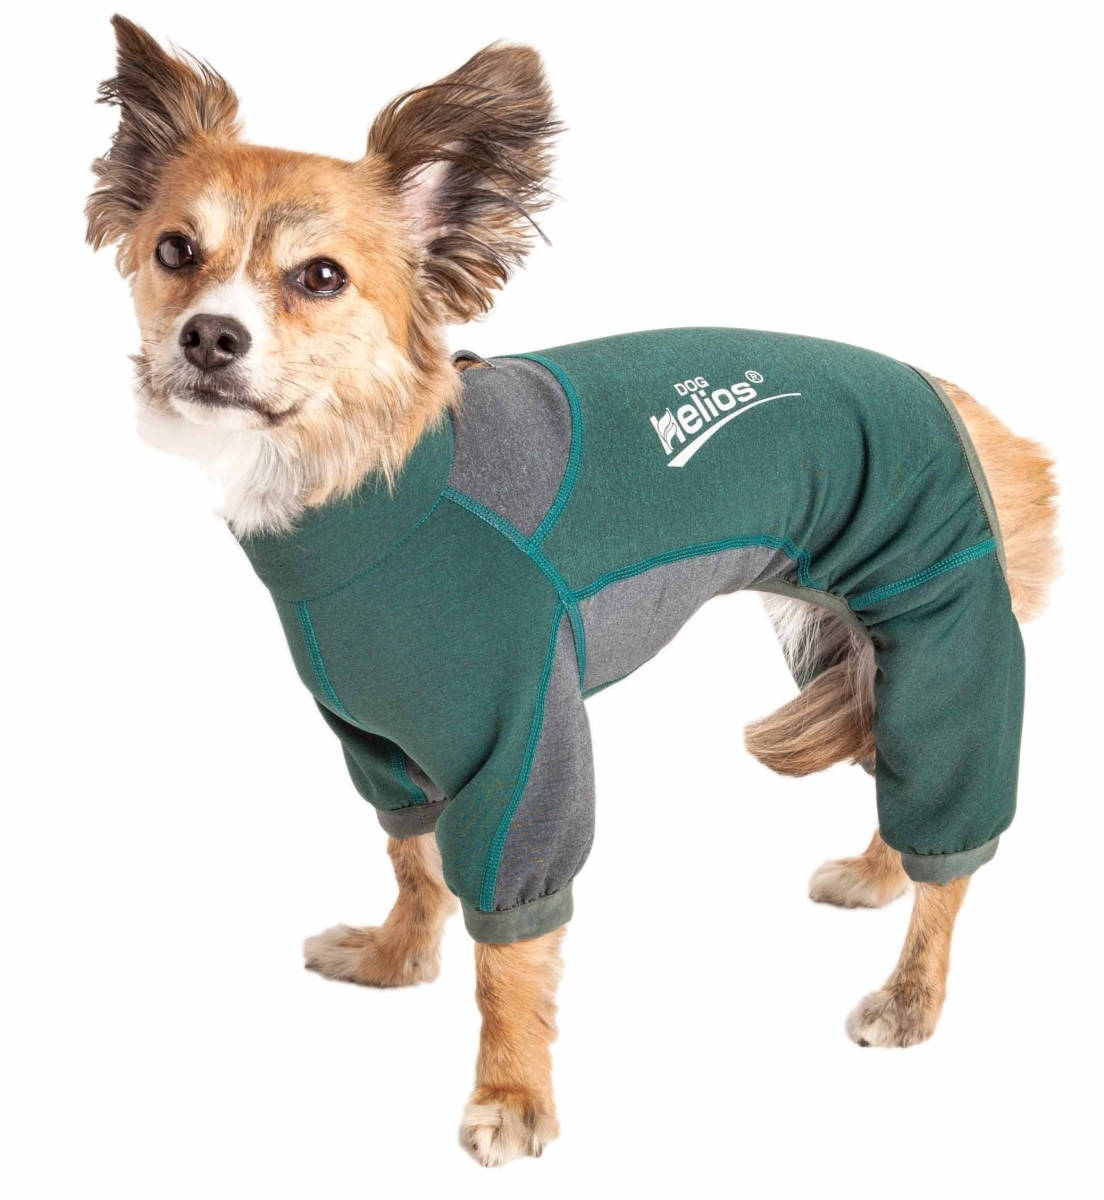 Yghl8gnlg Rufflex 4-way-stretch Breathable Full Bodied Performance Dog Warmup Track Suit - Green & Grey, Large